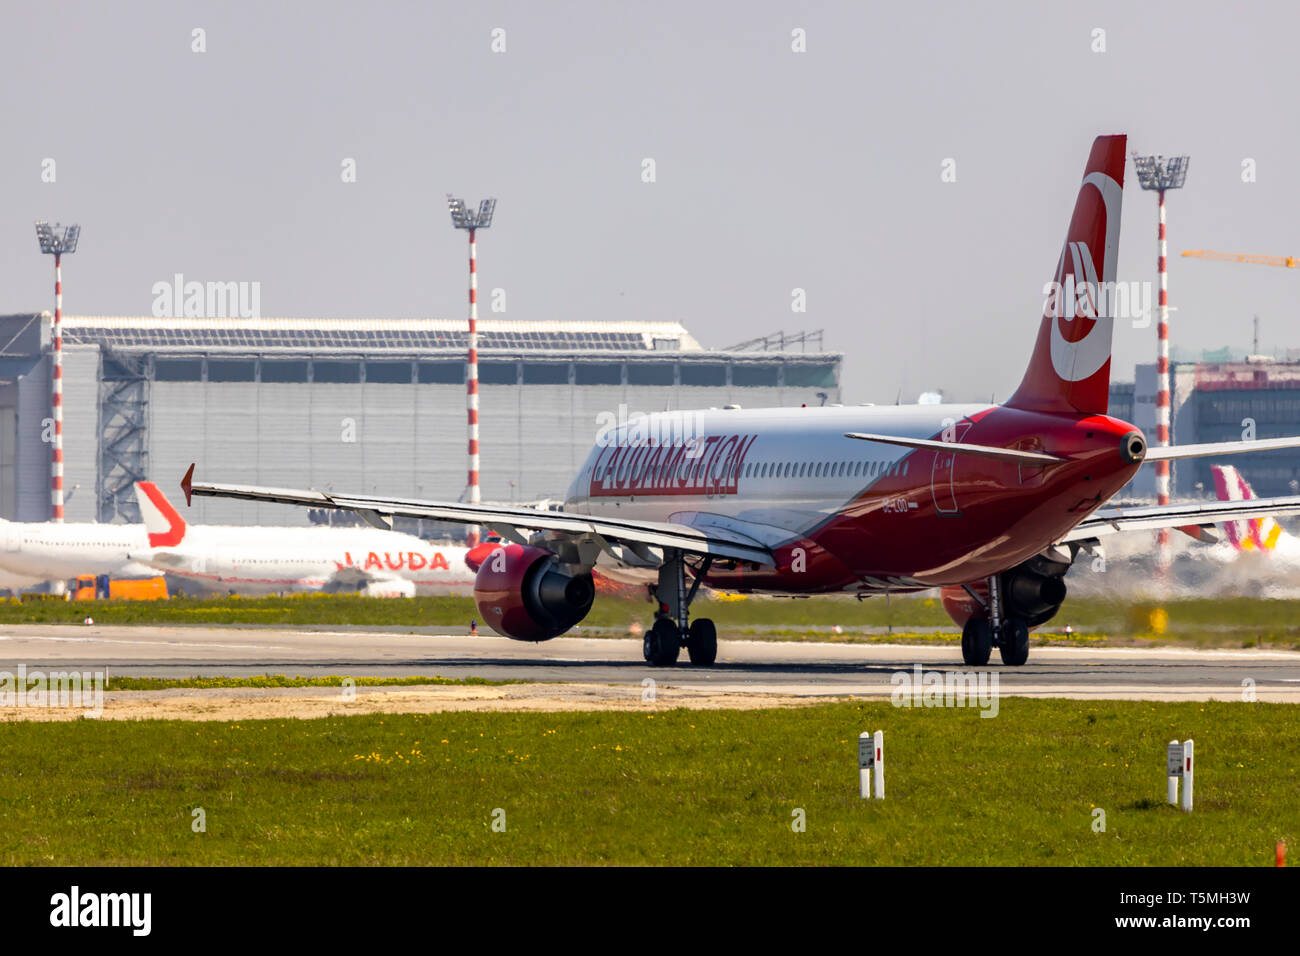 Dusseldorf International Airport, DUS, Lauda Airplane, Laudamotion, Airbus A320, on the taxiway, air traffic control tower, terminal building, Stock Photo